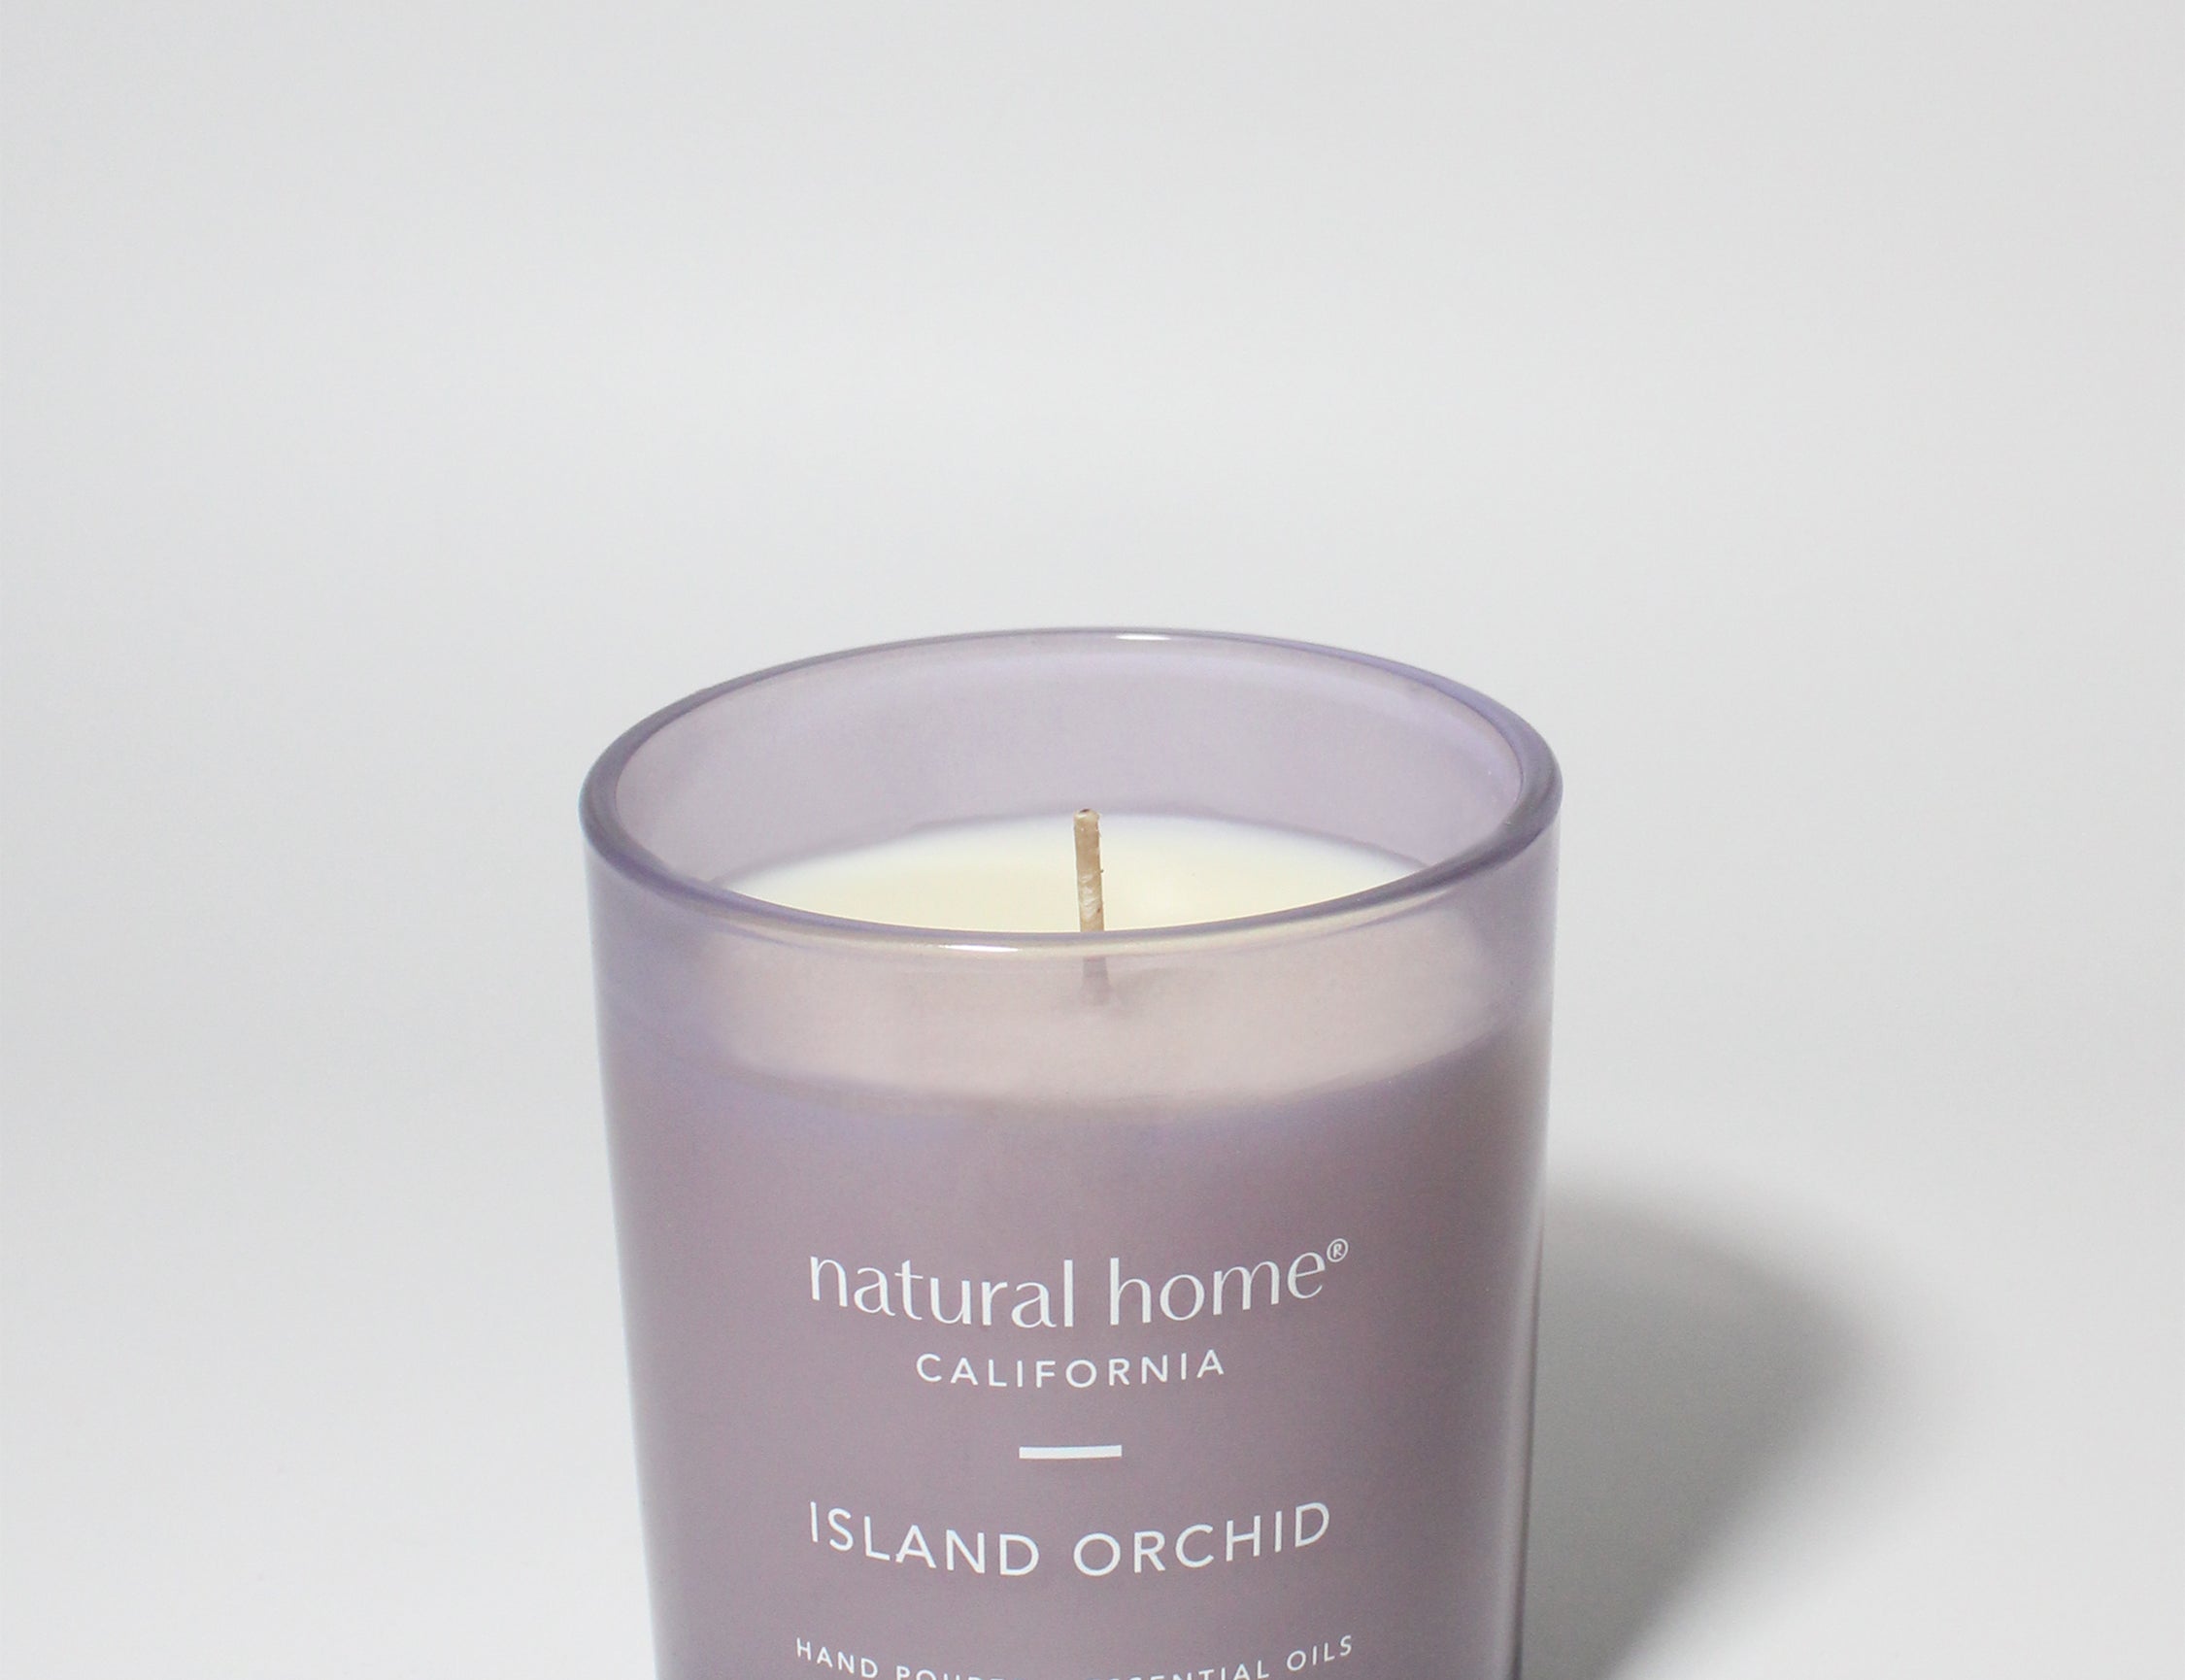 Island Orchid Natural Home 11.5 oz scented candle Purple vessel with solid metal lid